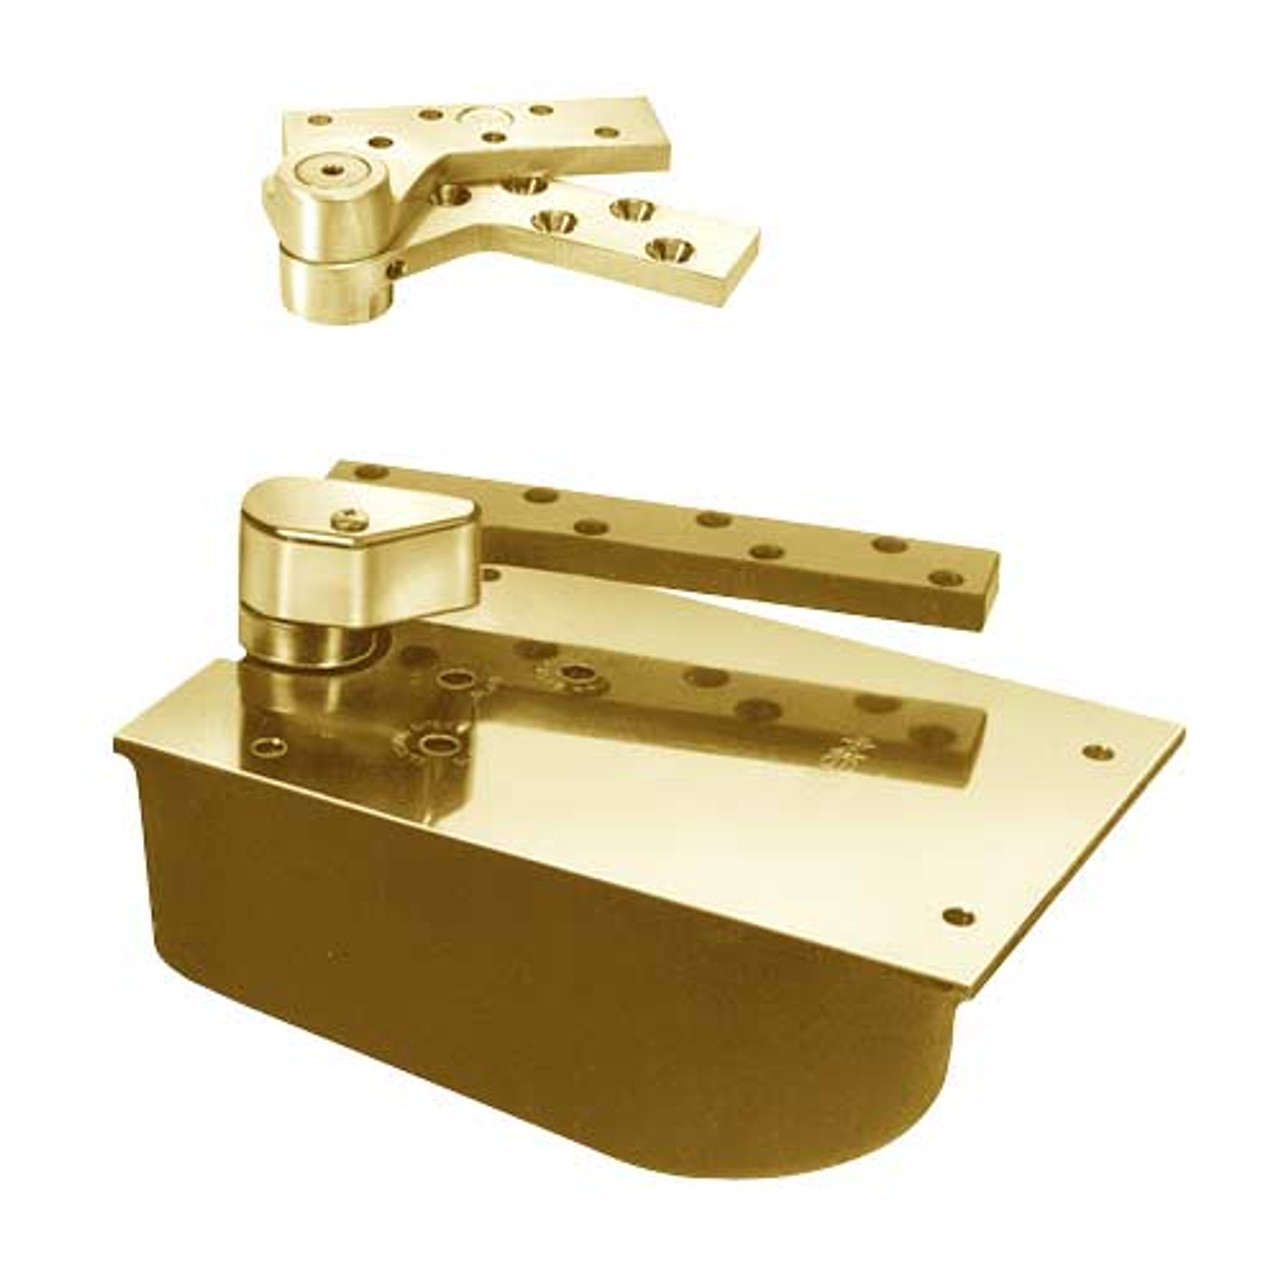 L27-85N-RH-2-605 Rixson 27 Series Extra Heavy Duty Lead Lined Offset Floor Closer in Bright Brass Finish